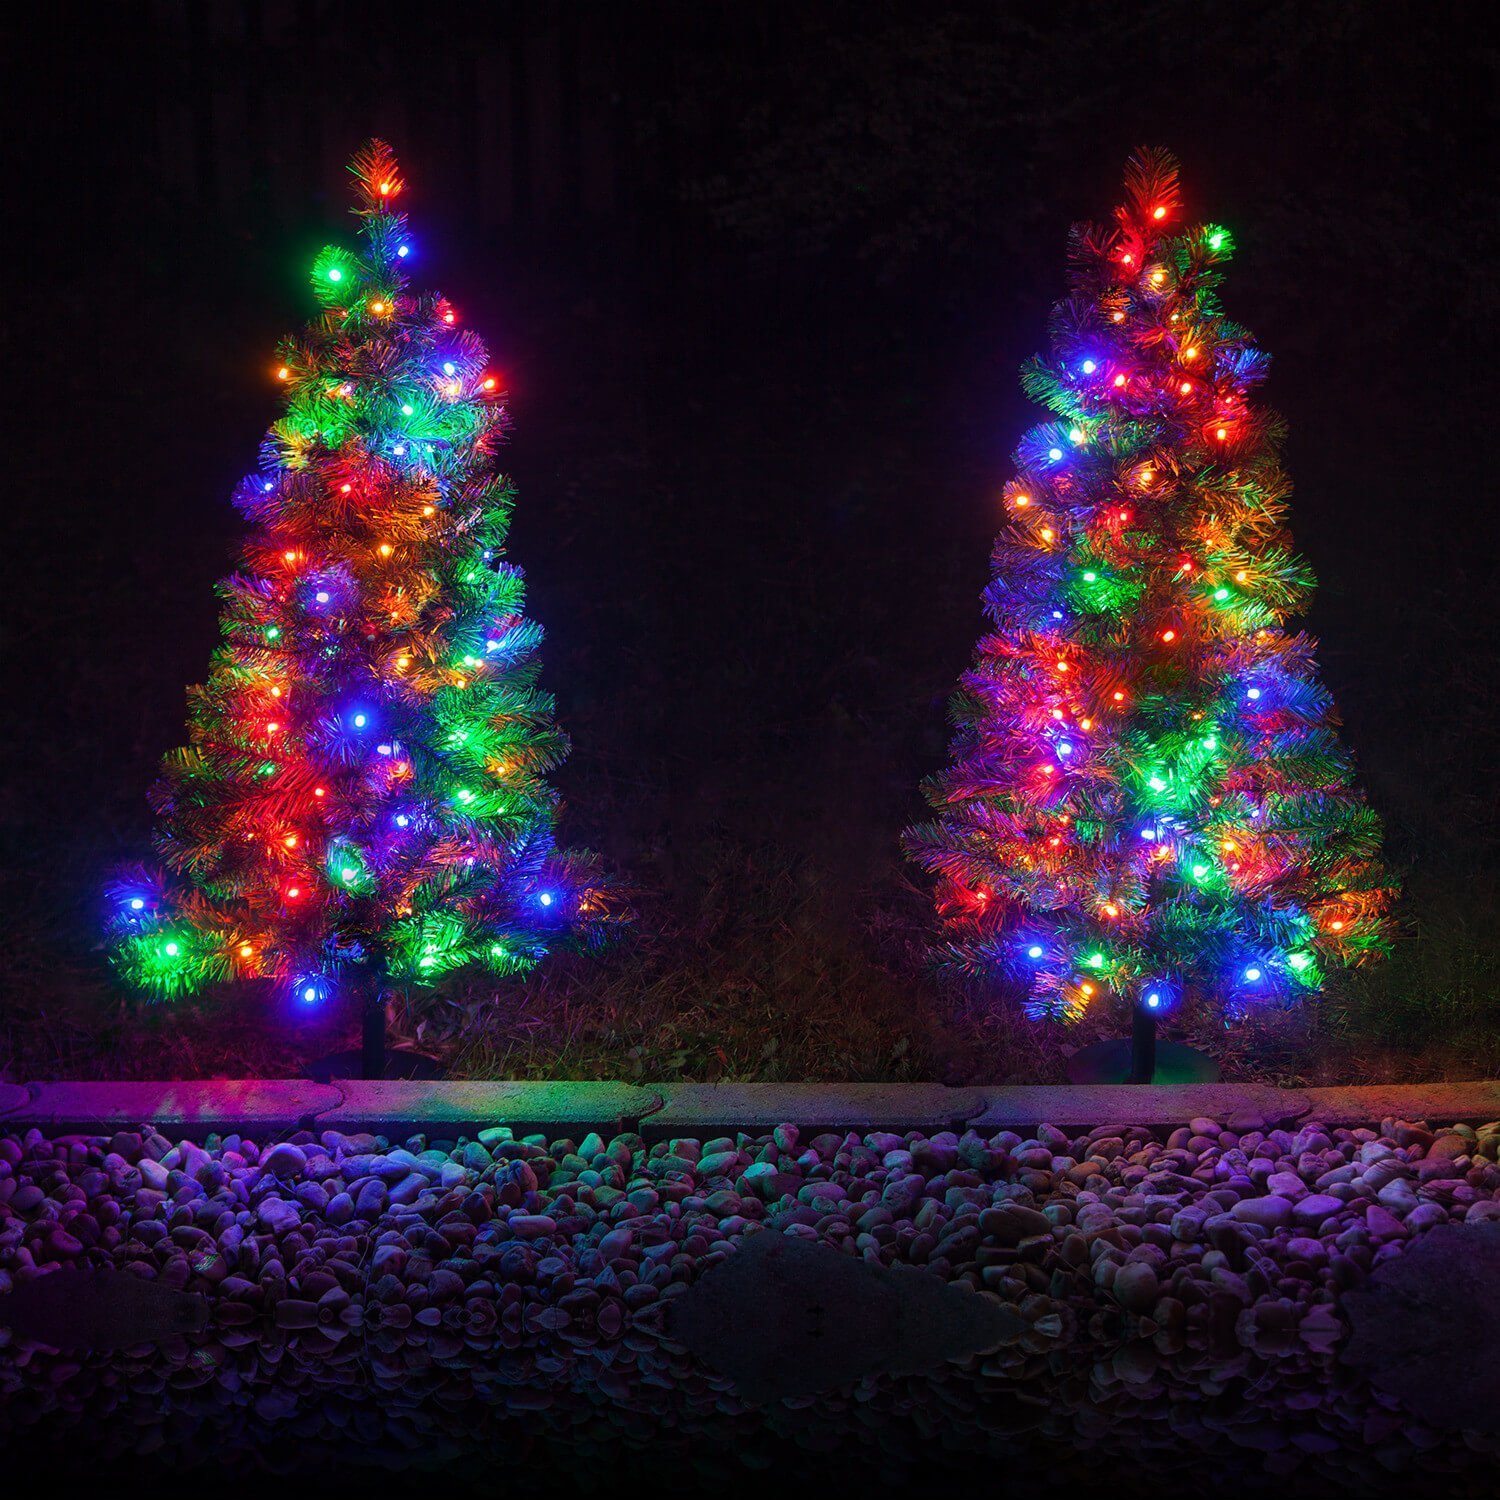 outdoor christmas tree, commercial christmas tree, large outdoor christmas tree, led outdoor christmas tree, large christmas tree, outdoor commercial christmas trees, 20 foot christmas tree, 16 foot christmas tree, large outdoor christmas trees for sale, outside christmas tree, commercial artificial christmas trees sale, outdoor xmas tree, commercial christmas trees wholesale, 20 christmas tree, commercial xmas trees, diy pole christmas tree, 50 foot christmas tree, large outdoor artificial xmas trees, large outdoor christmas tree topper, 12 christmas tree, commercial artificial christmas trees, 100 ft christmas tree, 20 ft christmas tree, huge christmas tree for sale, outdoor artificial christmas trees 